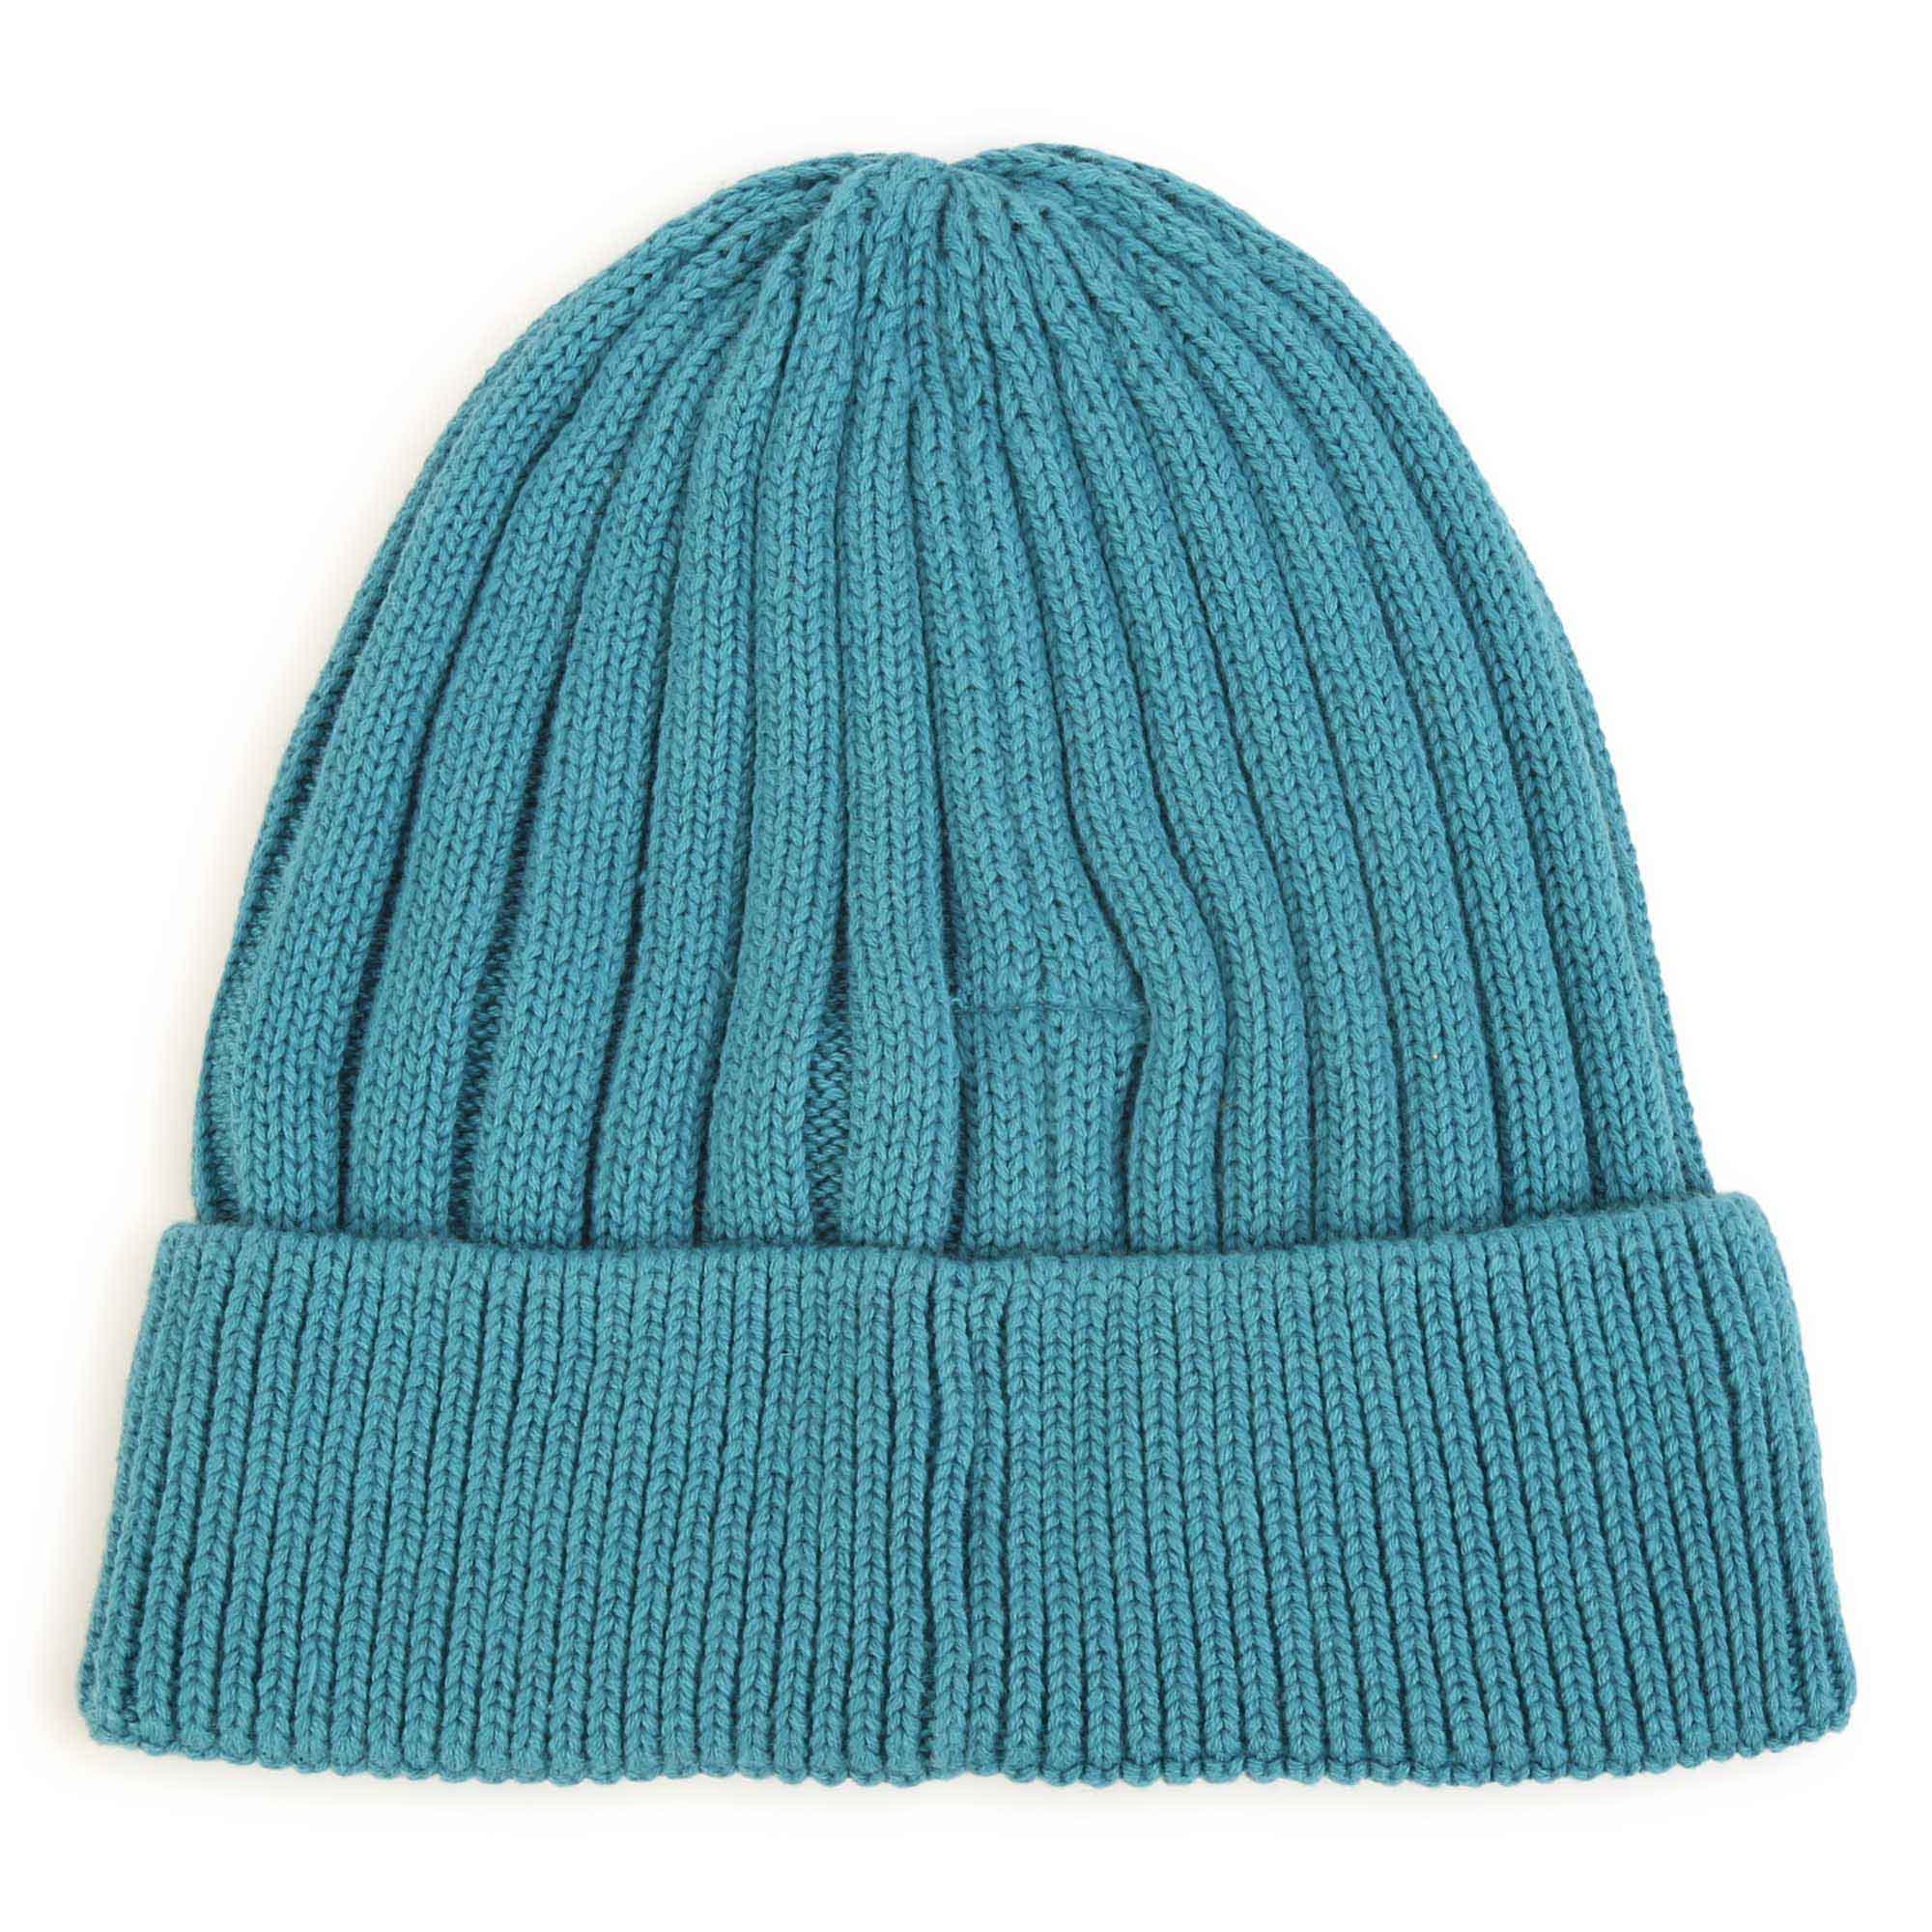 Timberland Pull On Hat - Electric Blue